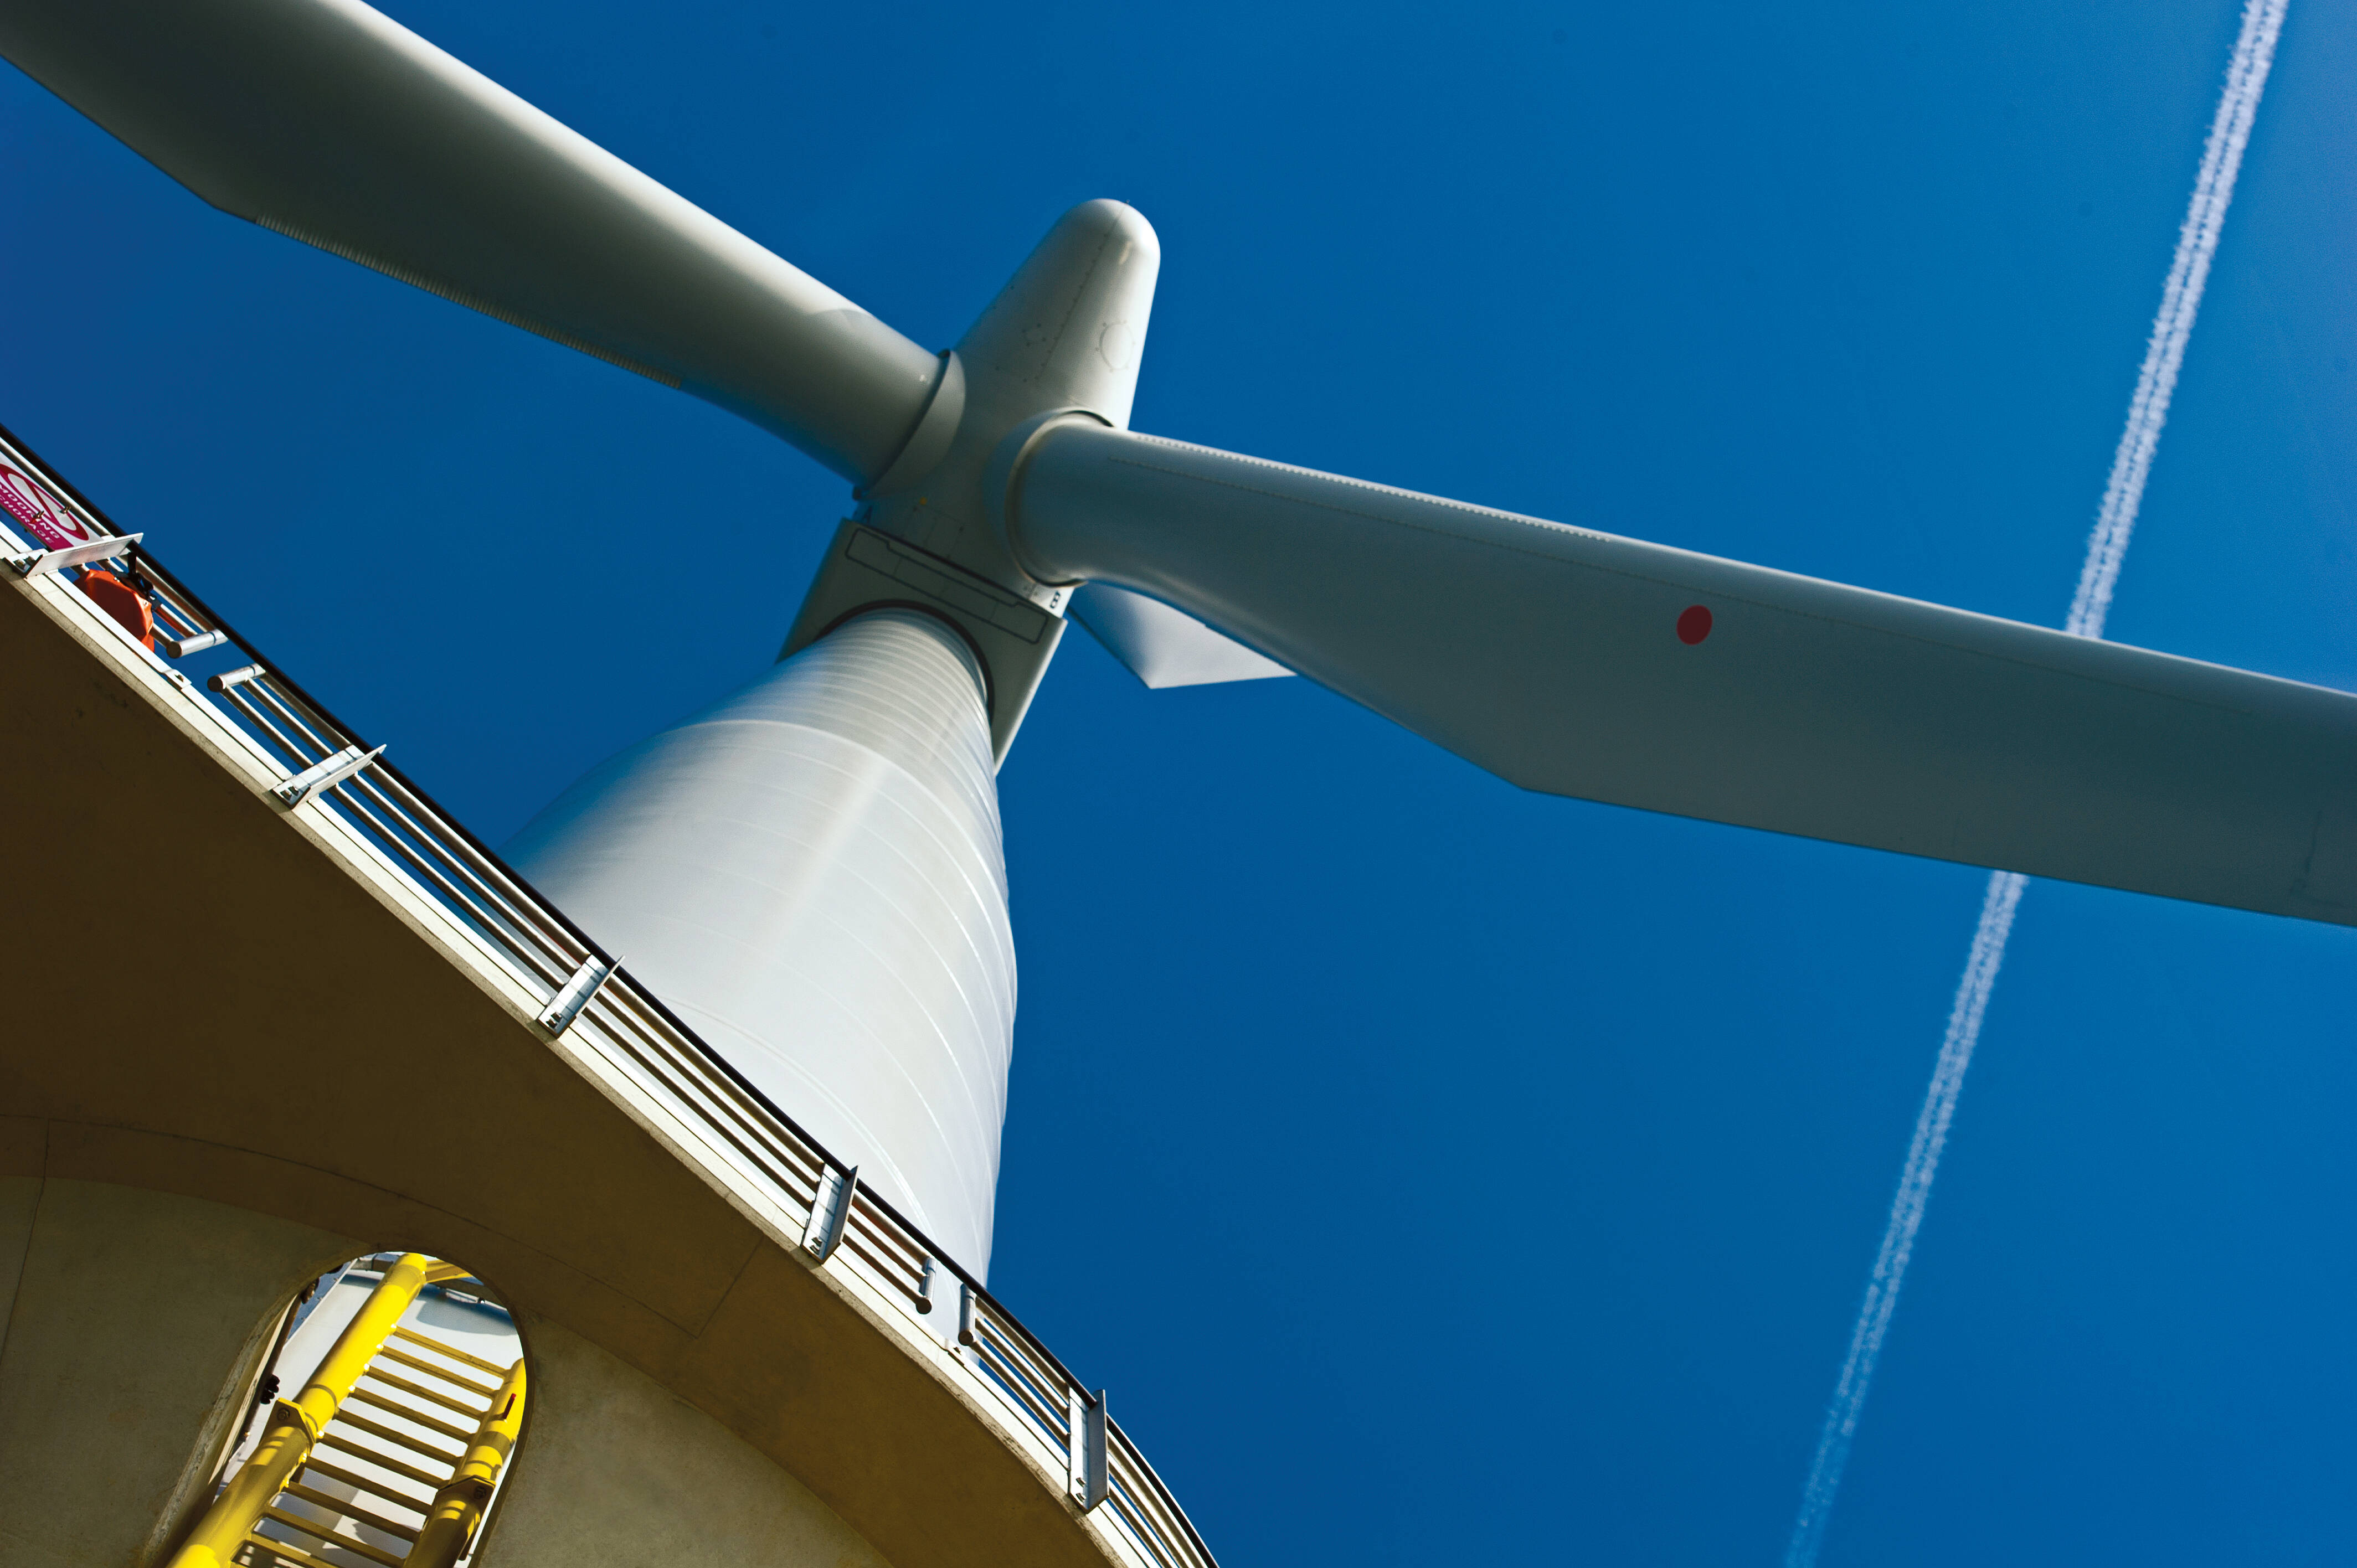 Offshore wind players pledge to bring costs below €80/MWh by 2025